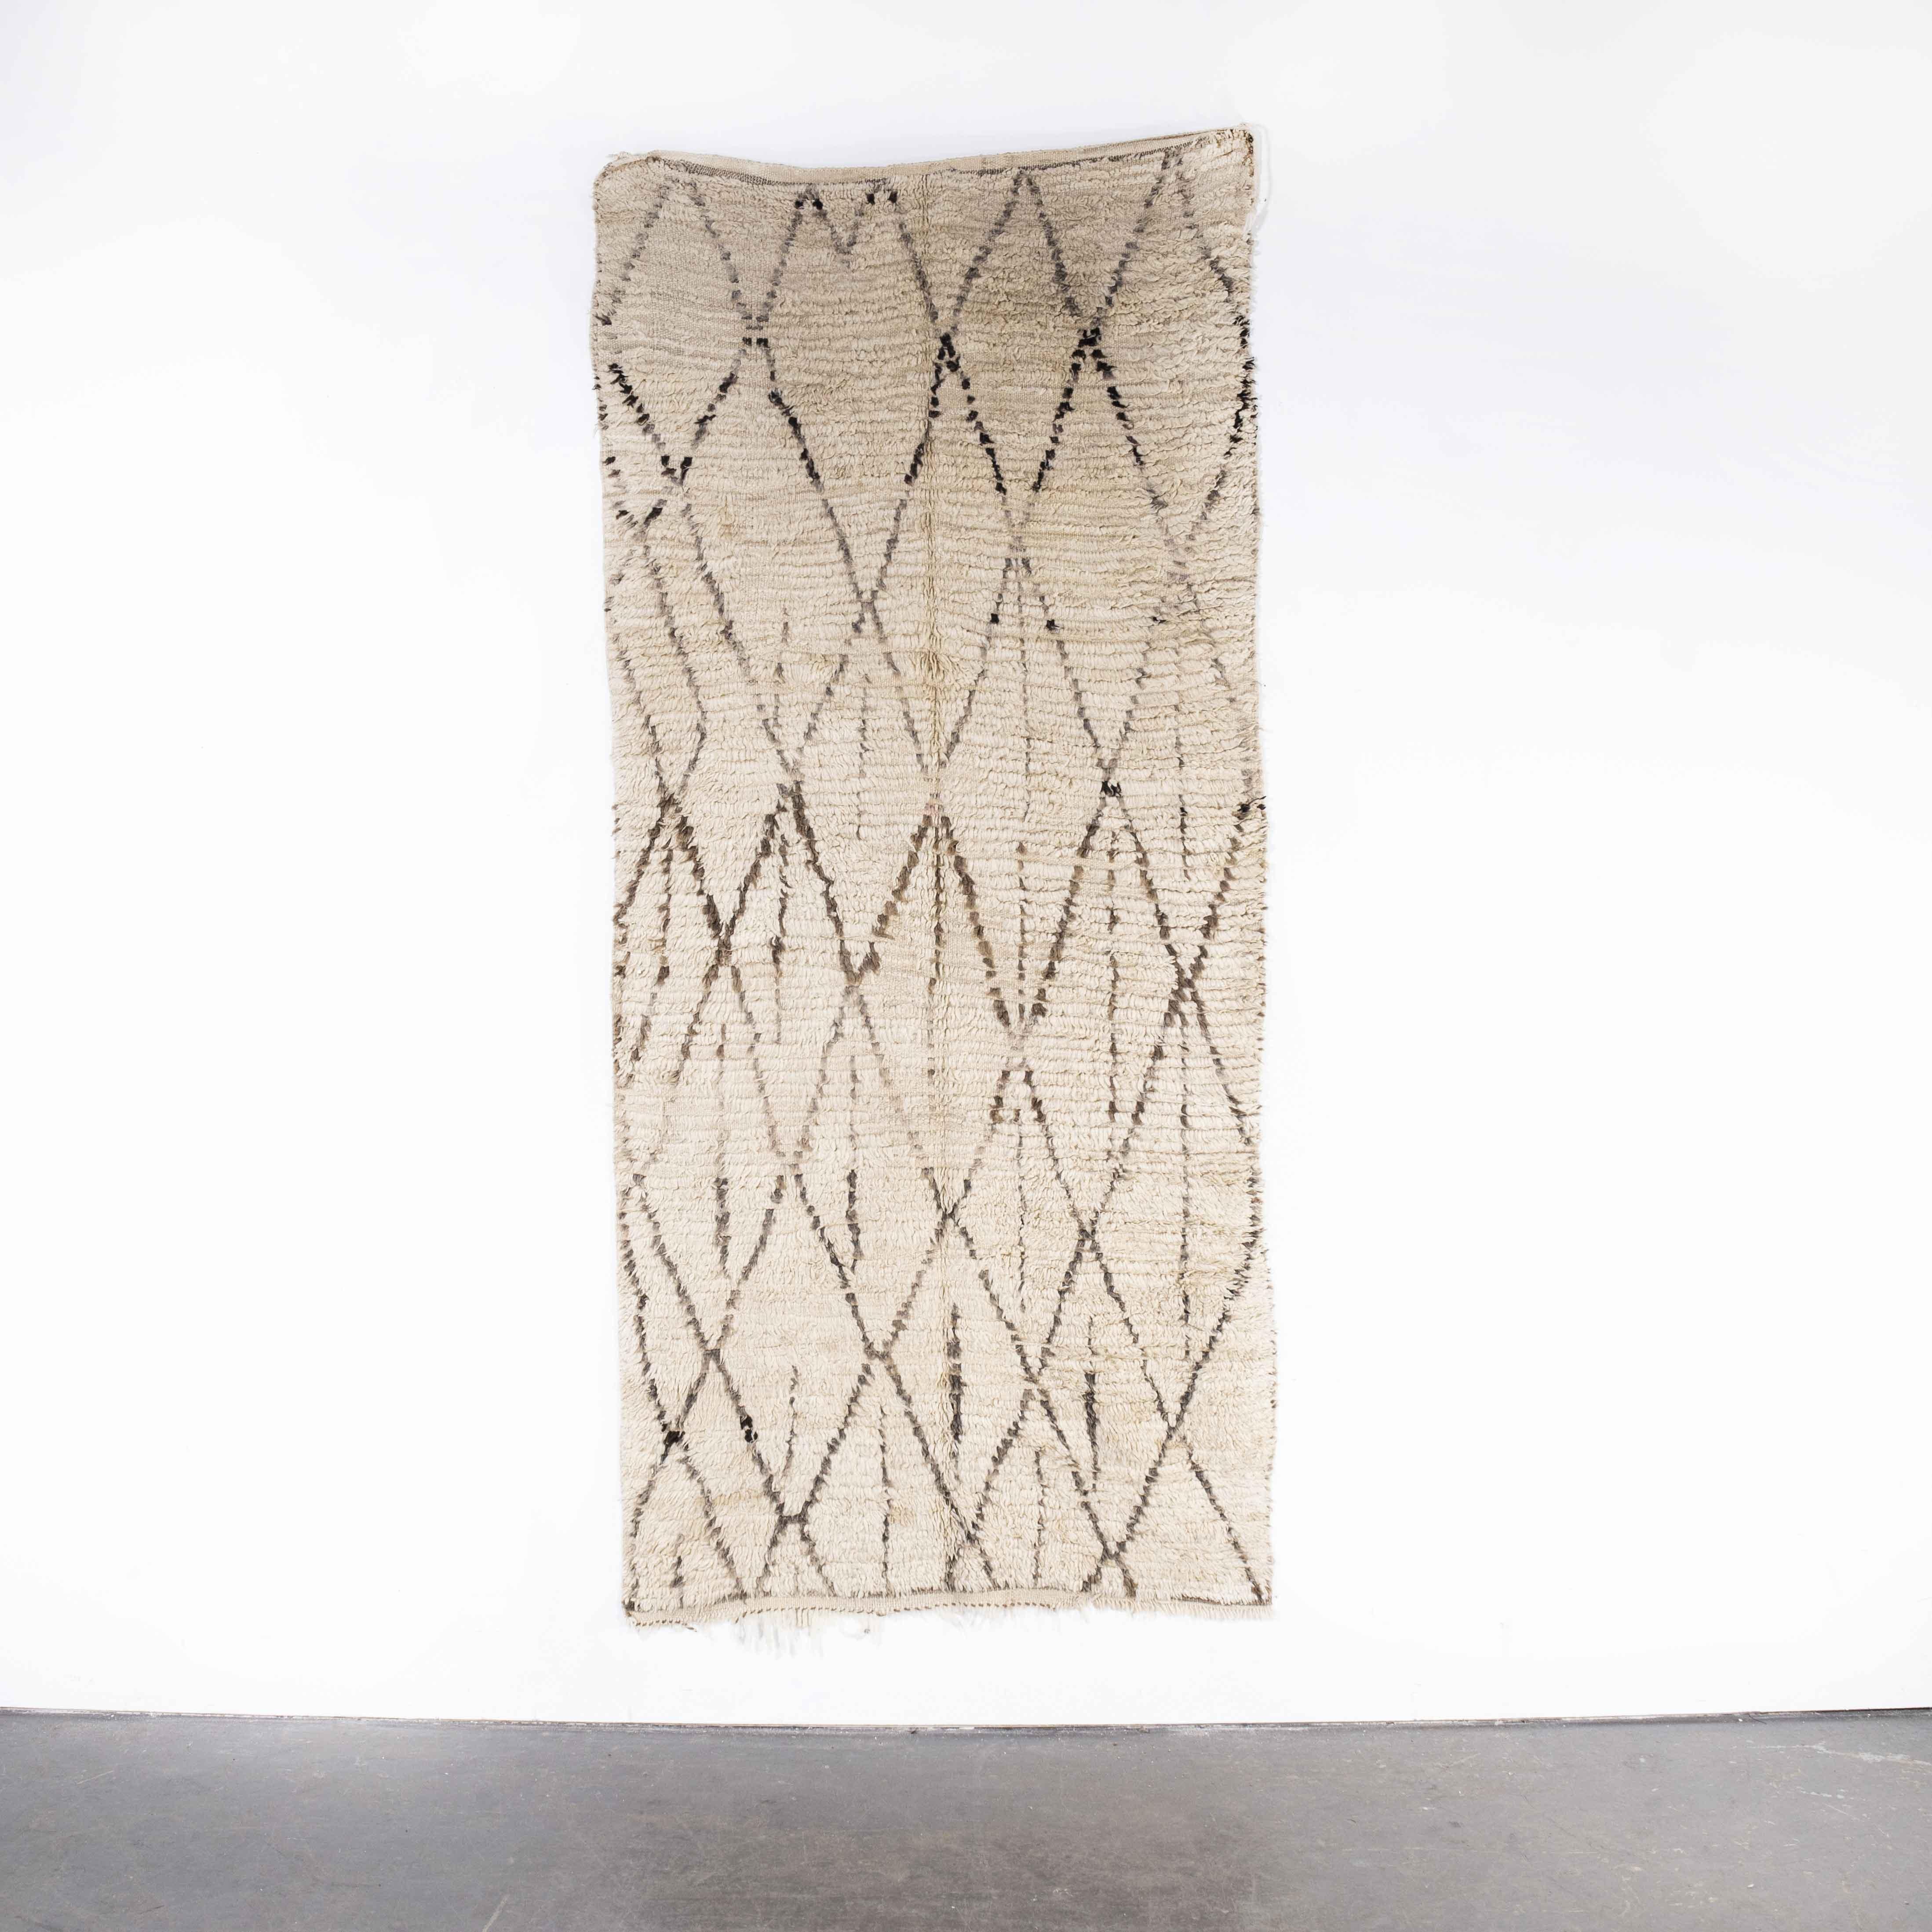 Vintage Berber Azilal rug – monochrome diamond wool
Vintage Berber Azilal rug – monochrome diamond wool. Azilal rugs are the most exuberant and colourful of Berber rugs, Diamonds shapes and strong lines play heavily into the design of Azilal rugs.